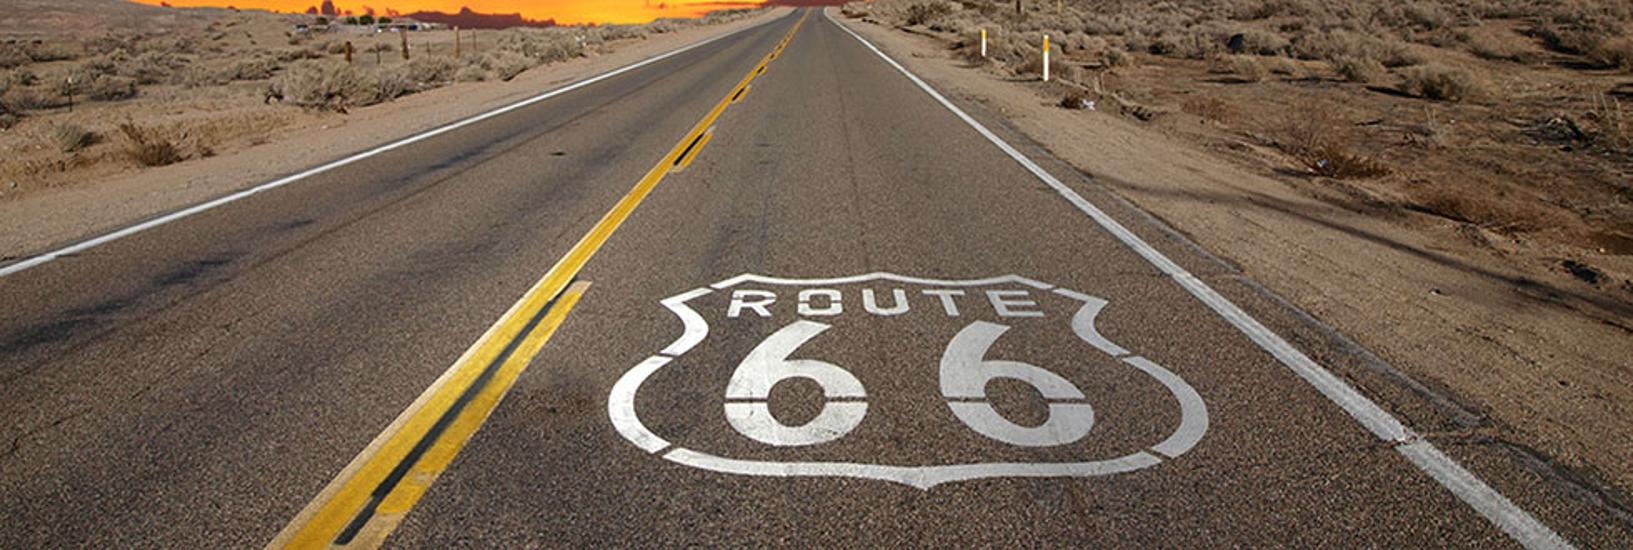 Route 66 Brunch: A Taste Of True Americana At Corinthia Budapest, 24 May